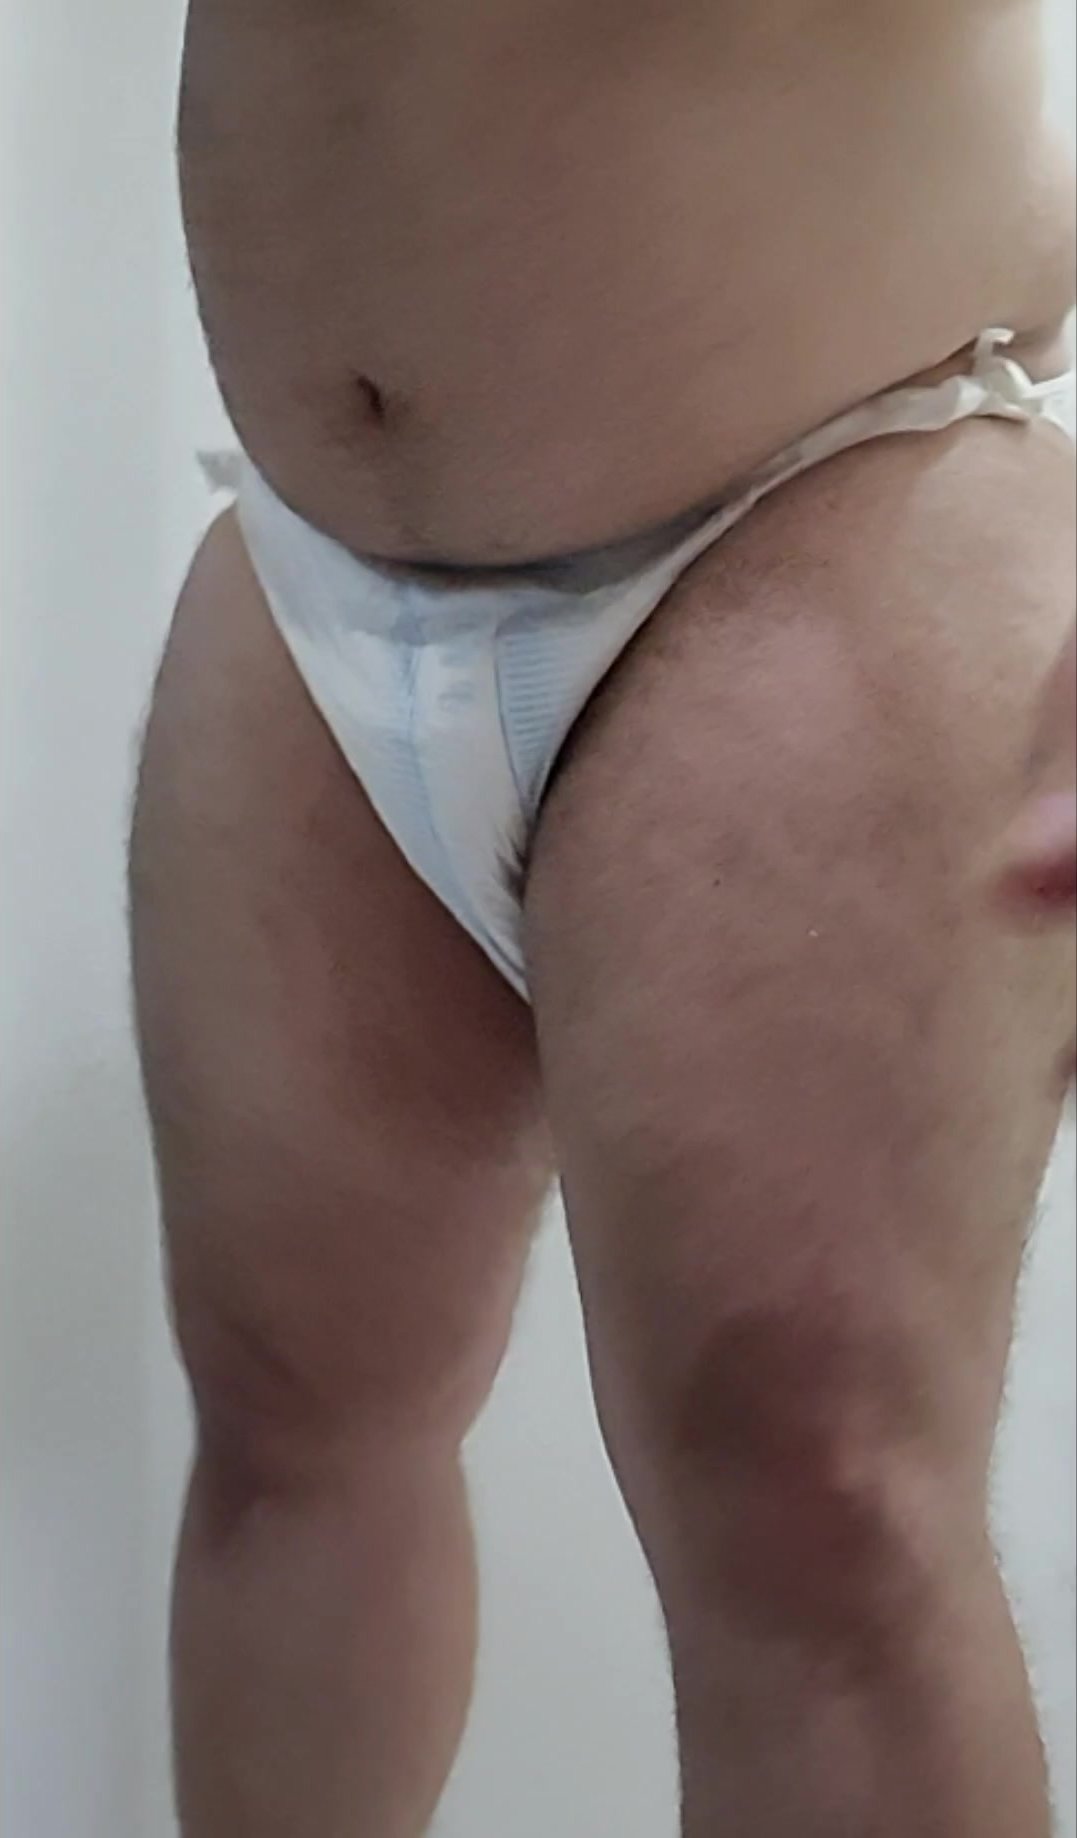 Turn around poopy diapered boy 2